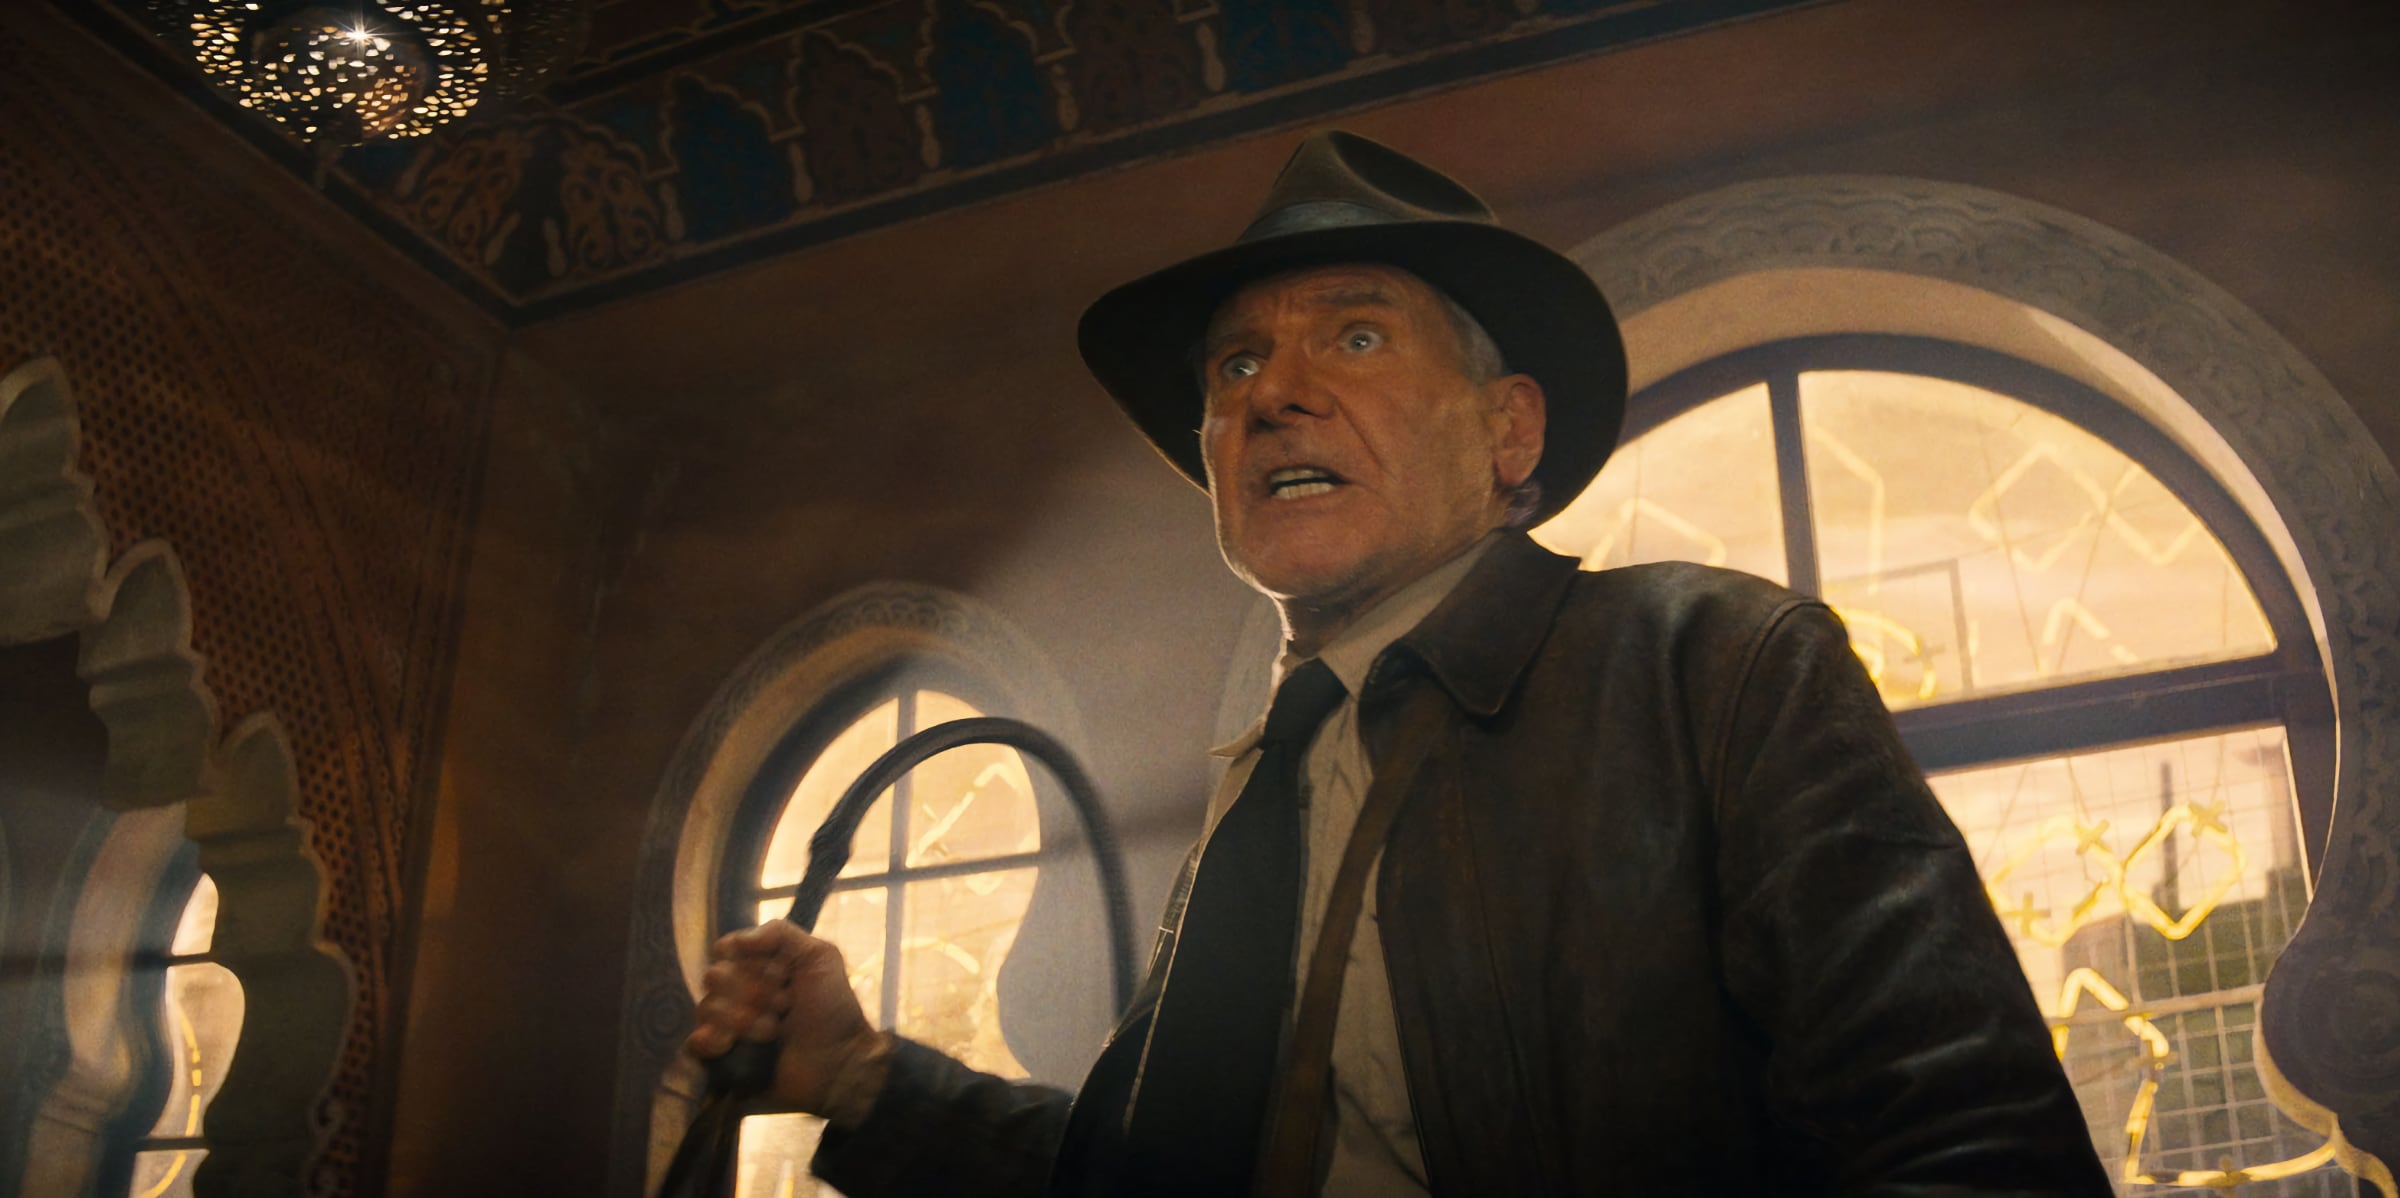 Indiana Jones Comes to Disney+ With First Four Movies Debuting May 31